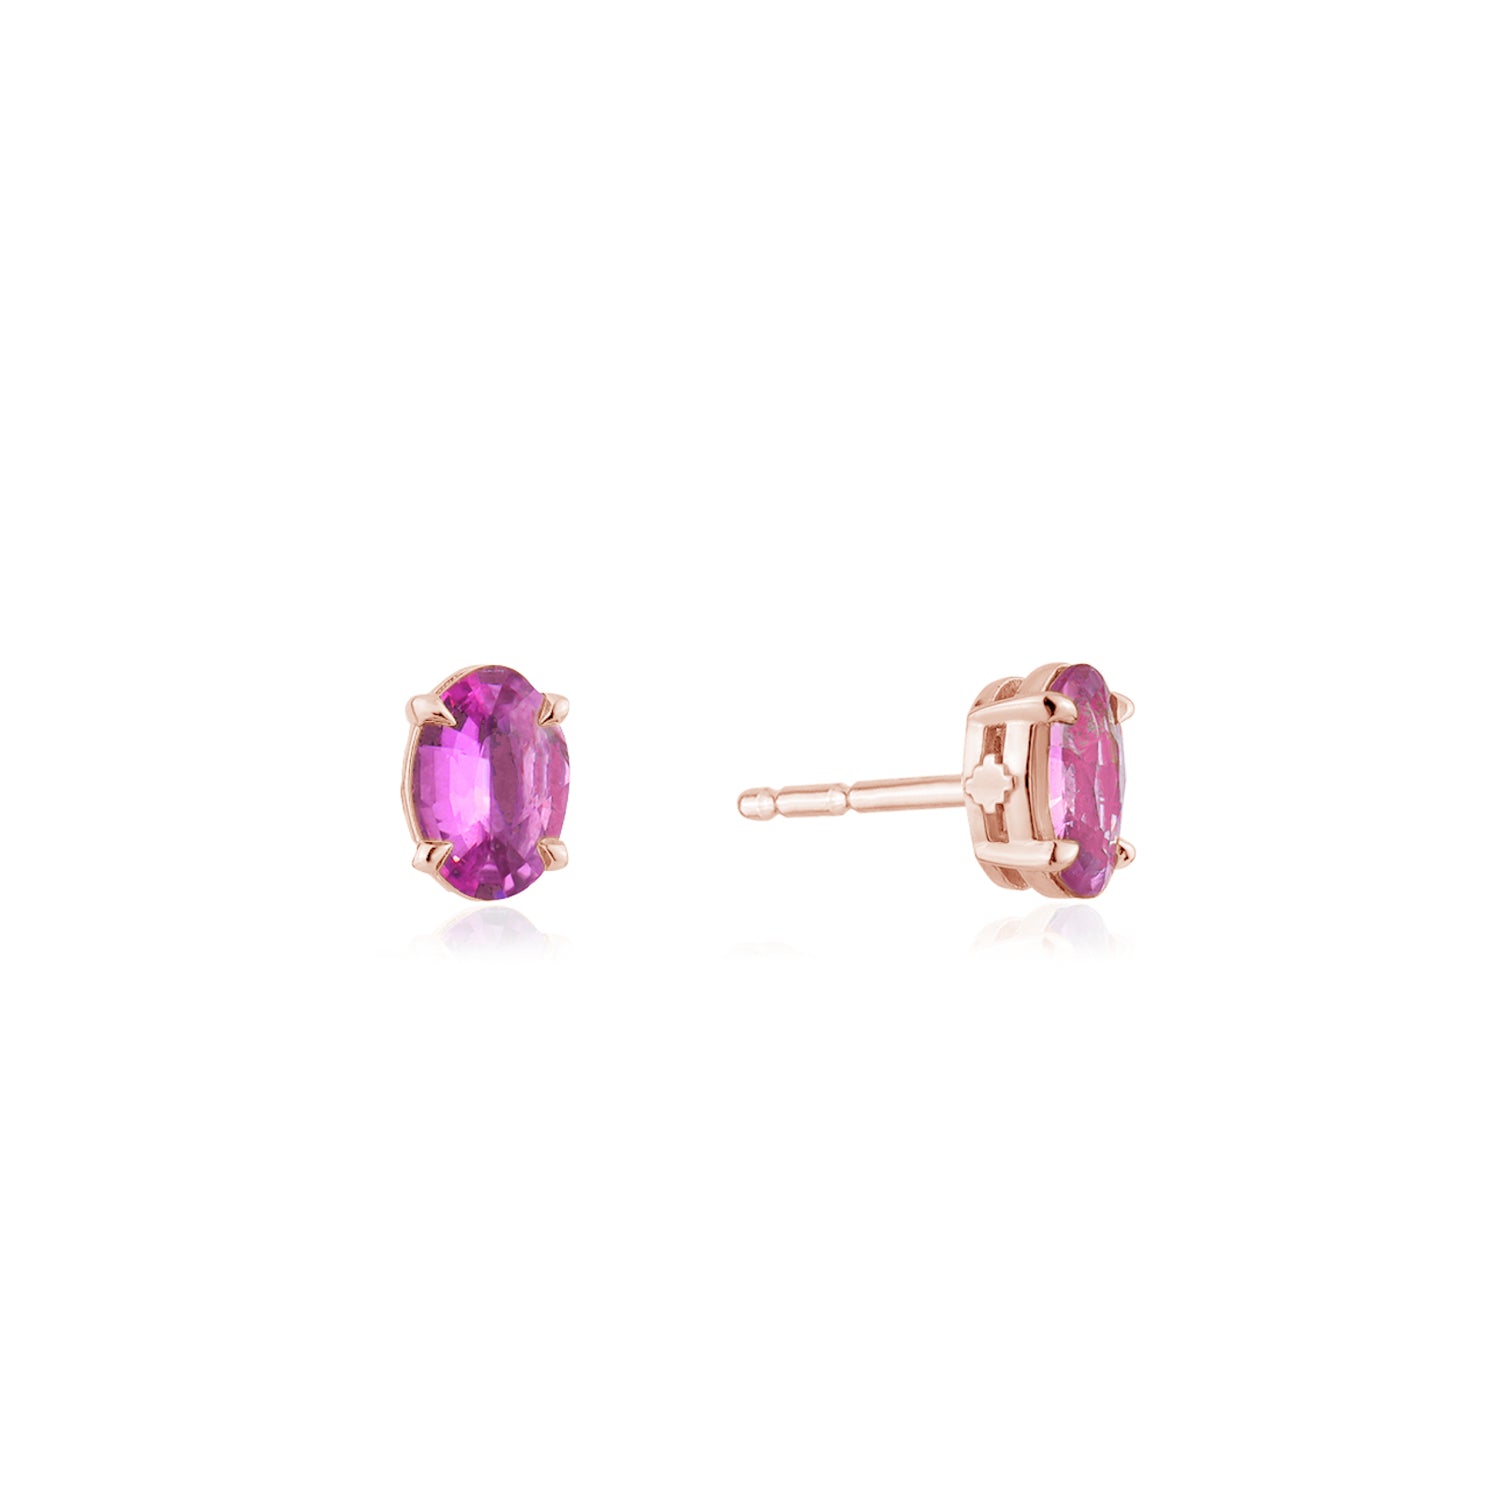 Oval-Shaped Pink Sapphire Stud Earrings in Rose Gold